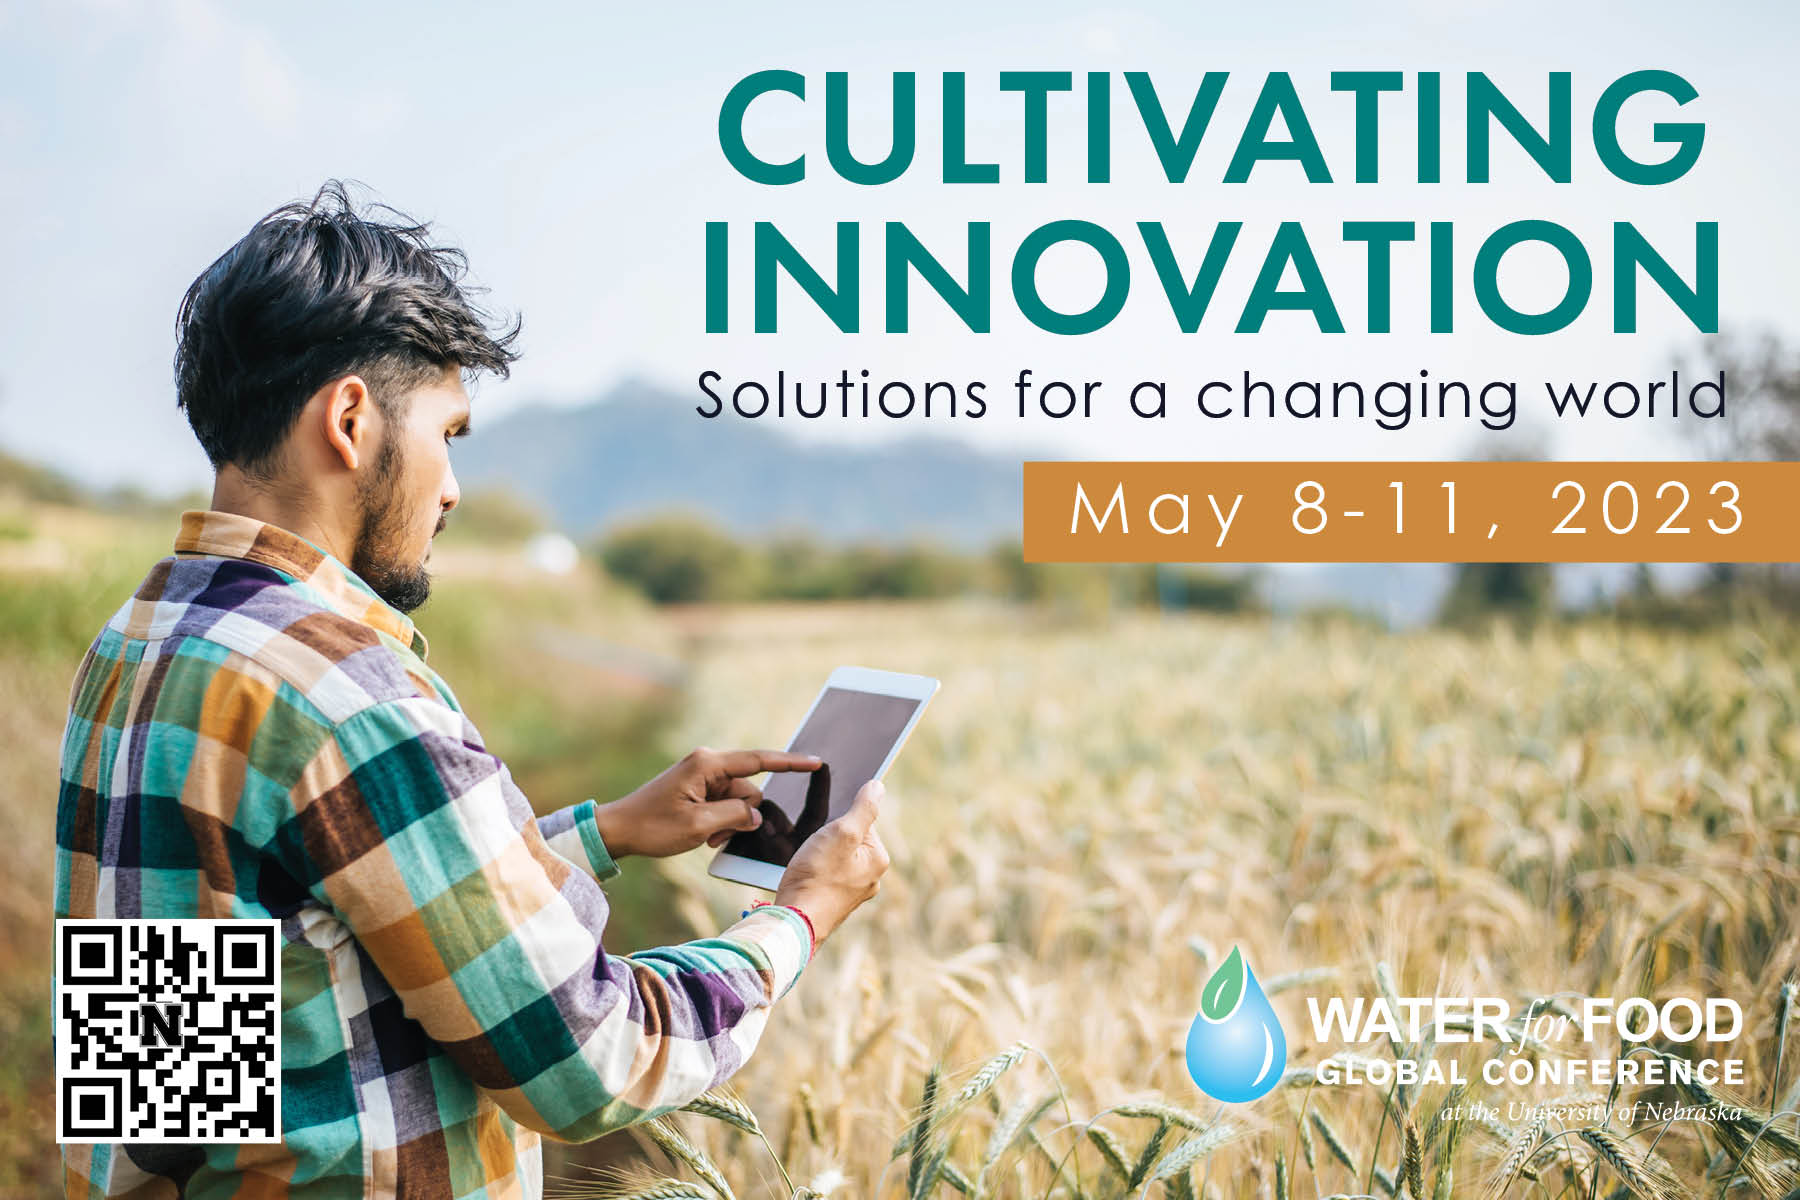 The 2023 Water for Food Global Conference will be held May 8-11. A special discount is offered for faculty, students and staff at the University of Nebraska.